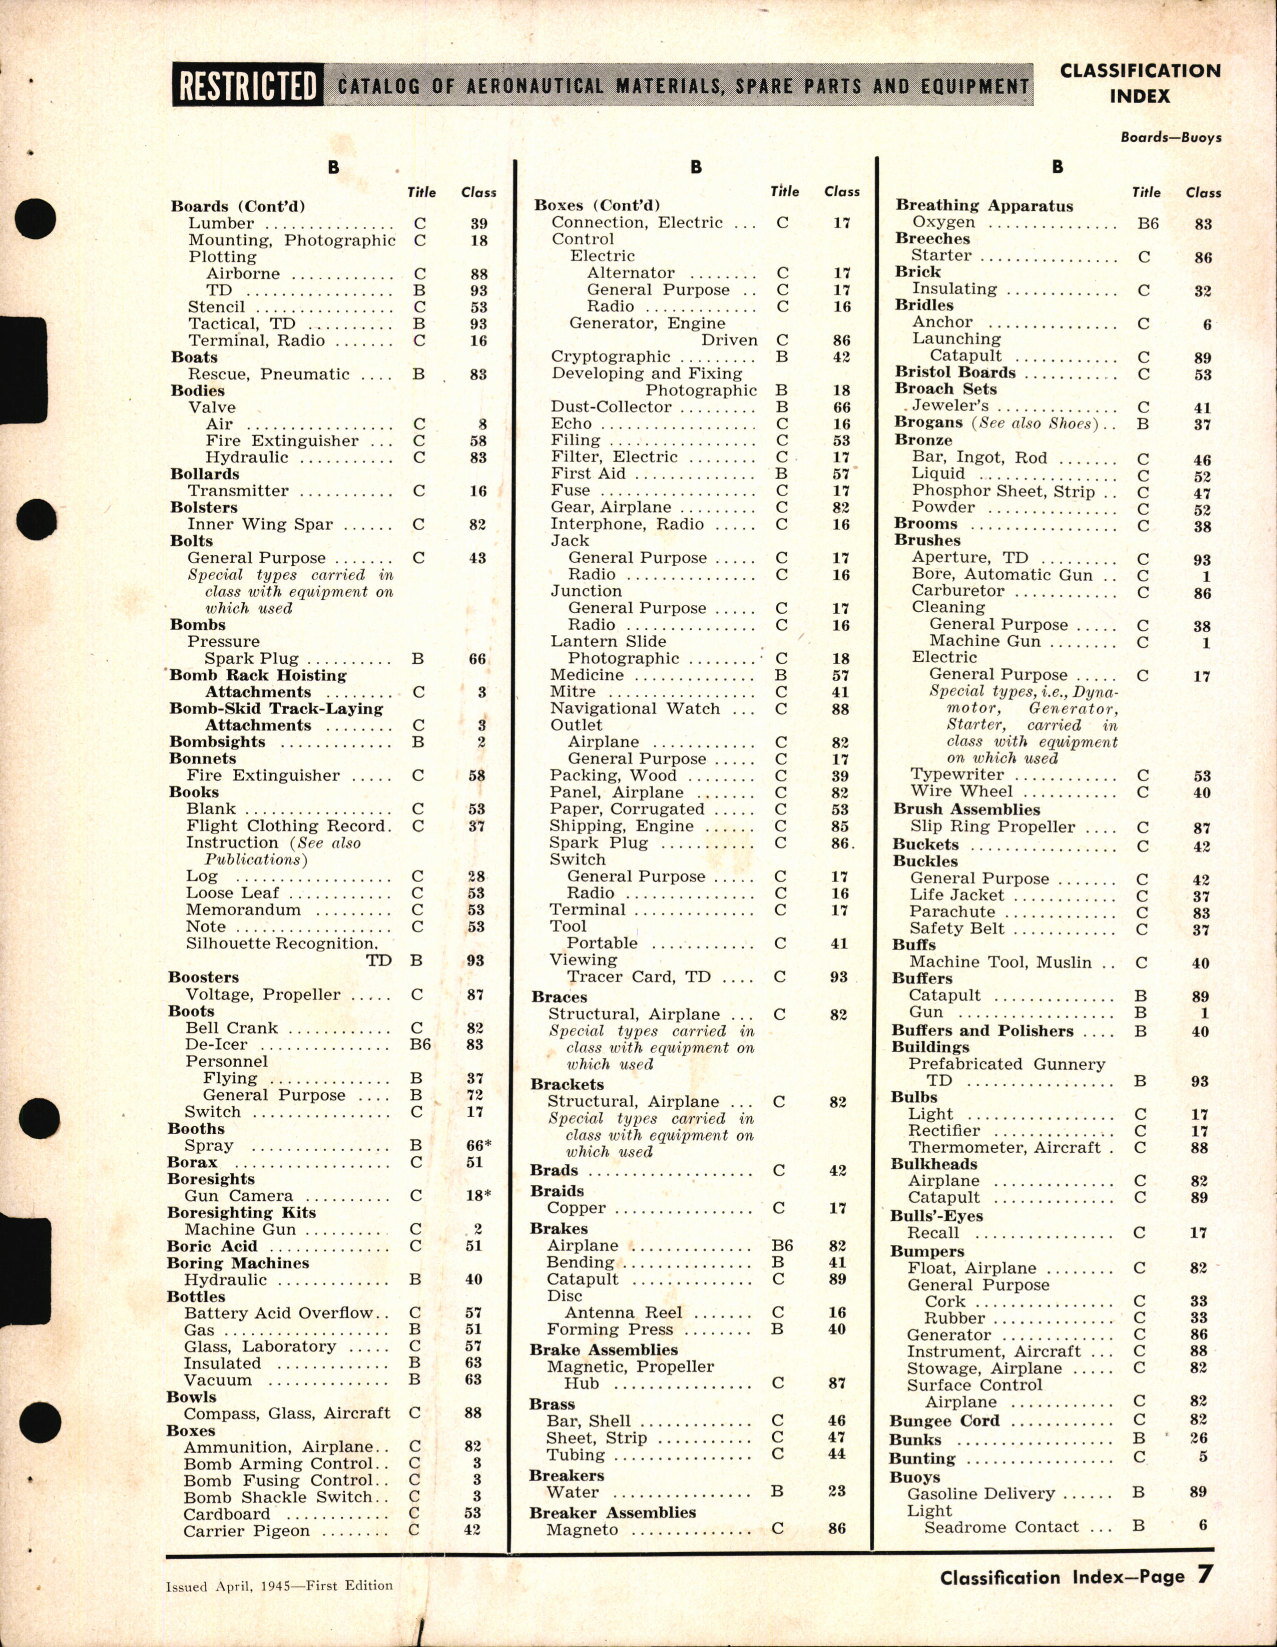 Sample page 7 from AirCorps Library document: Classification Index of Naval Aeronautical Materials 